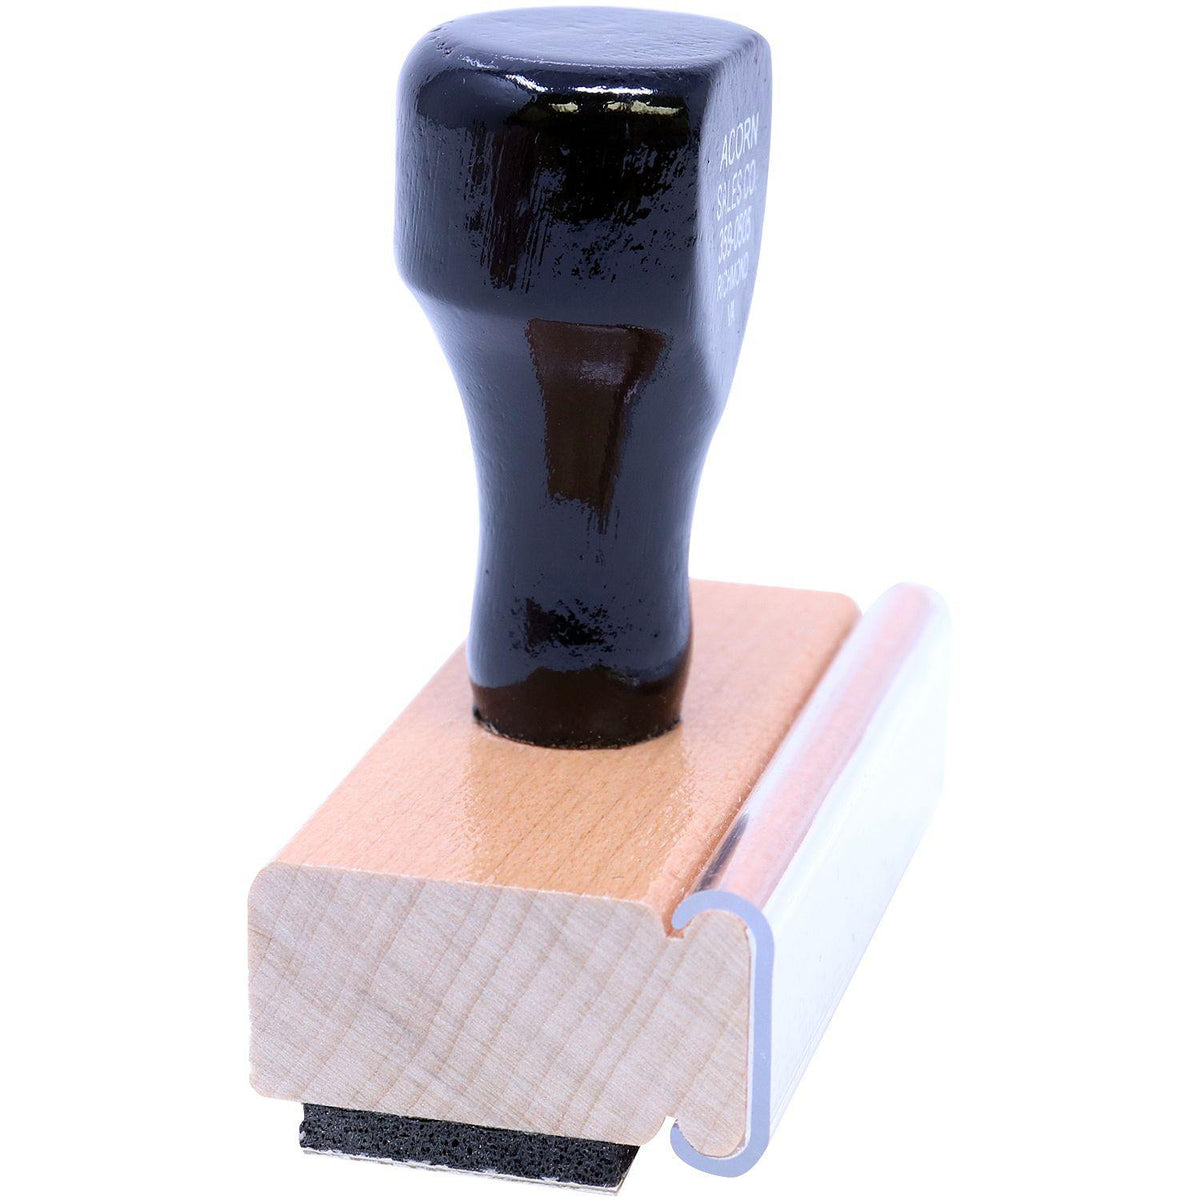 Side View of Large Mortgages Rubber Stamp at an Angle